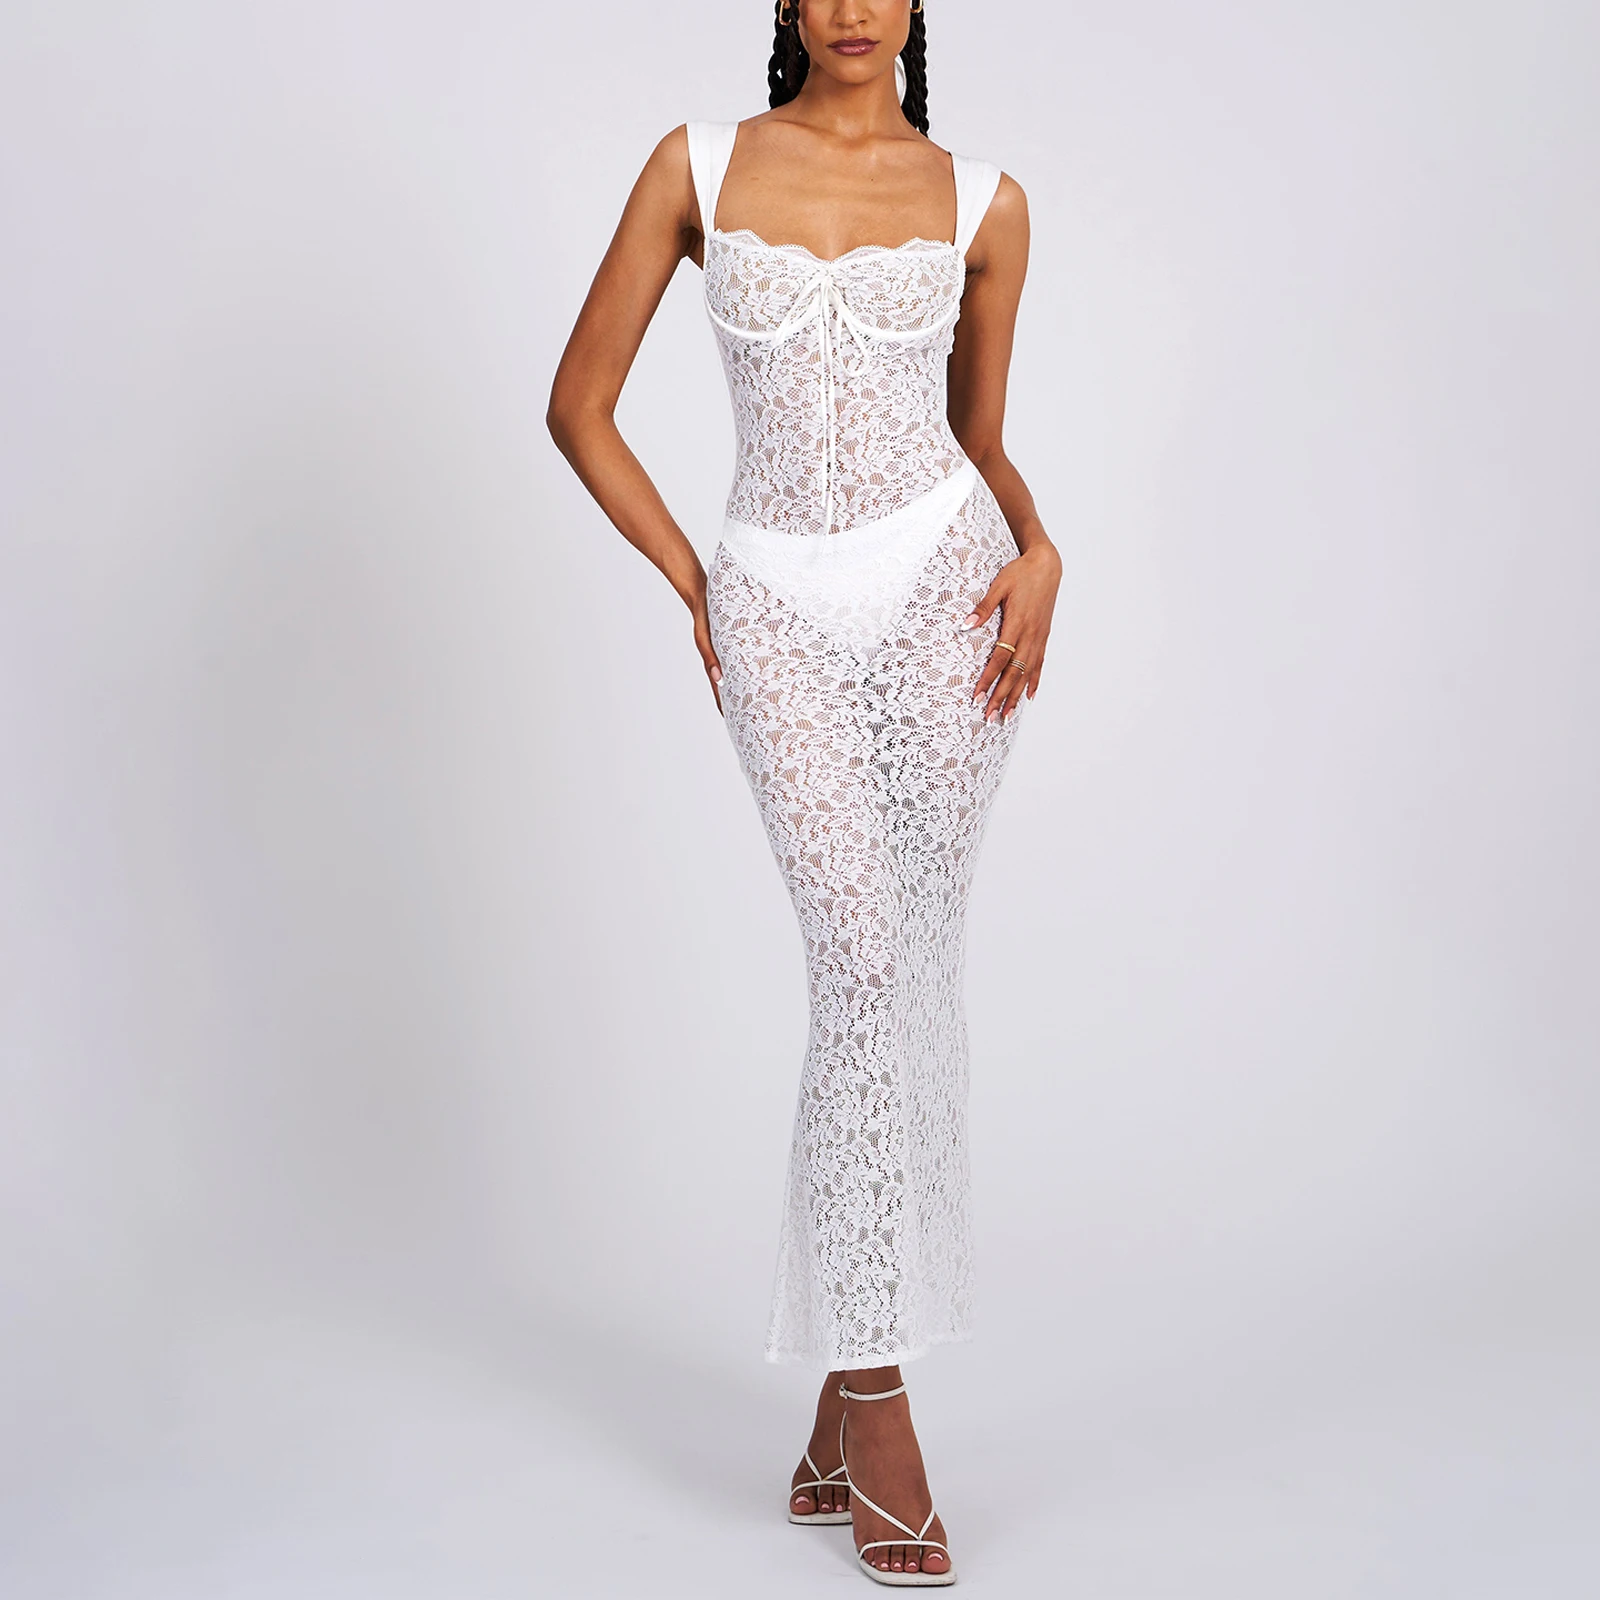 

Women Lace Spaghetti Strap Bodycon Maxi Dress See Through Long Cami Dress Summer Sexy Slim Fit Floral Lace Dresses